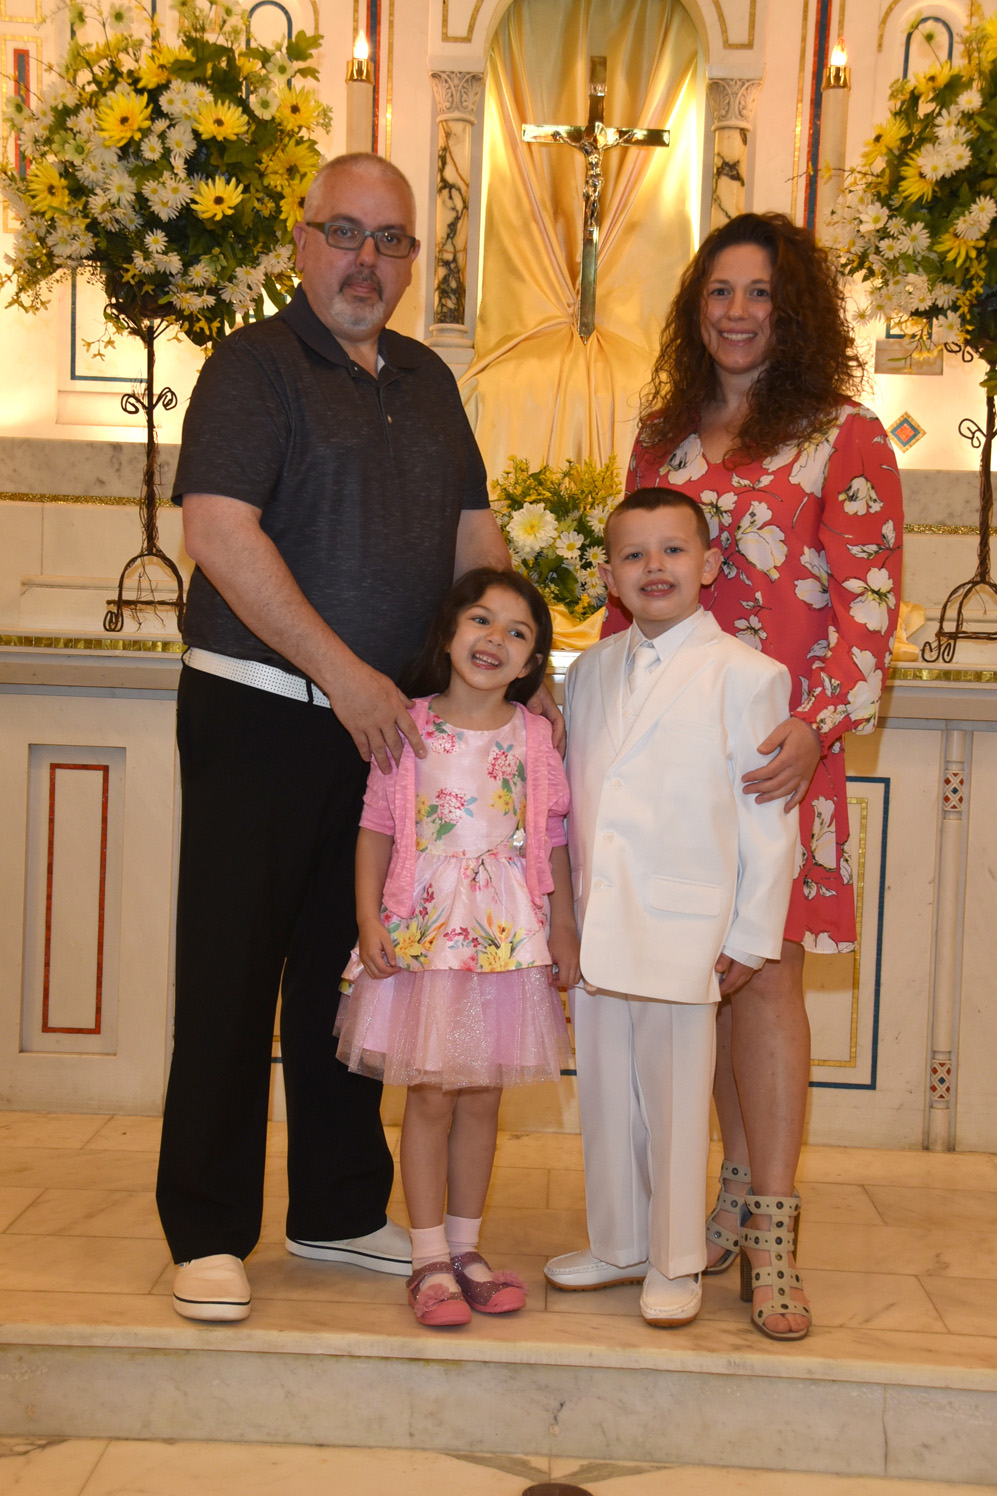 FIRST-COMMUNION-MAY-16-2021-8